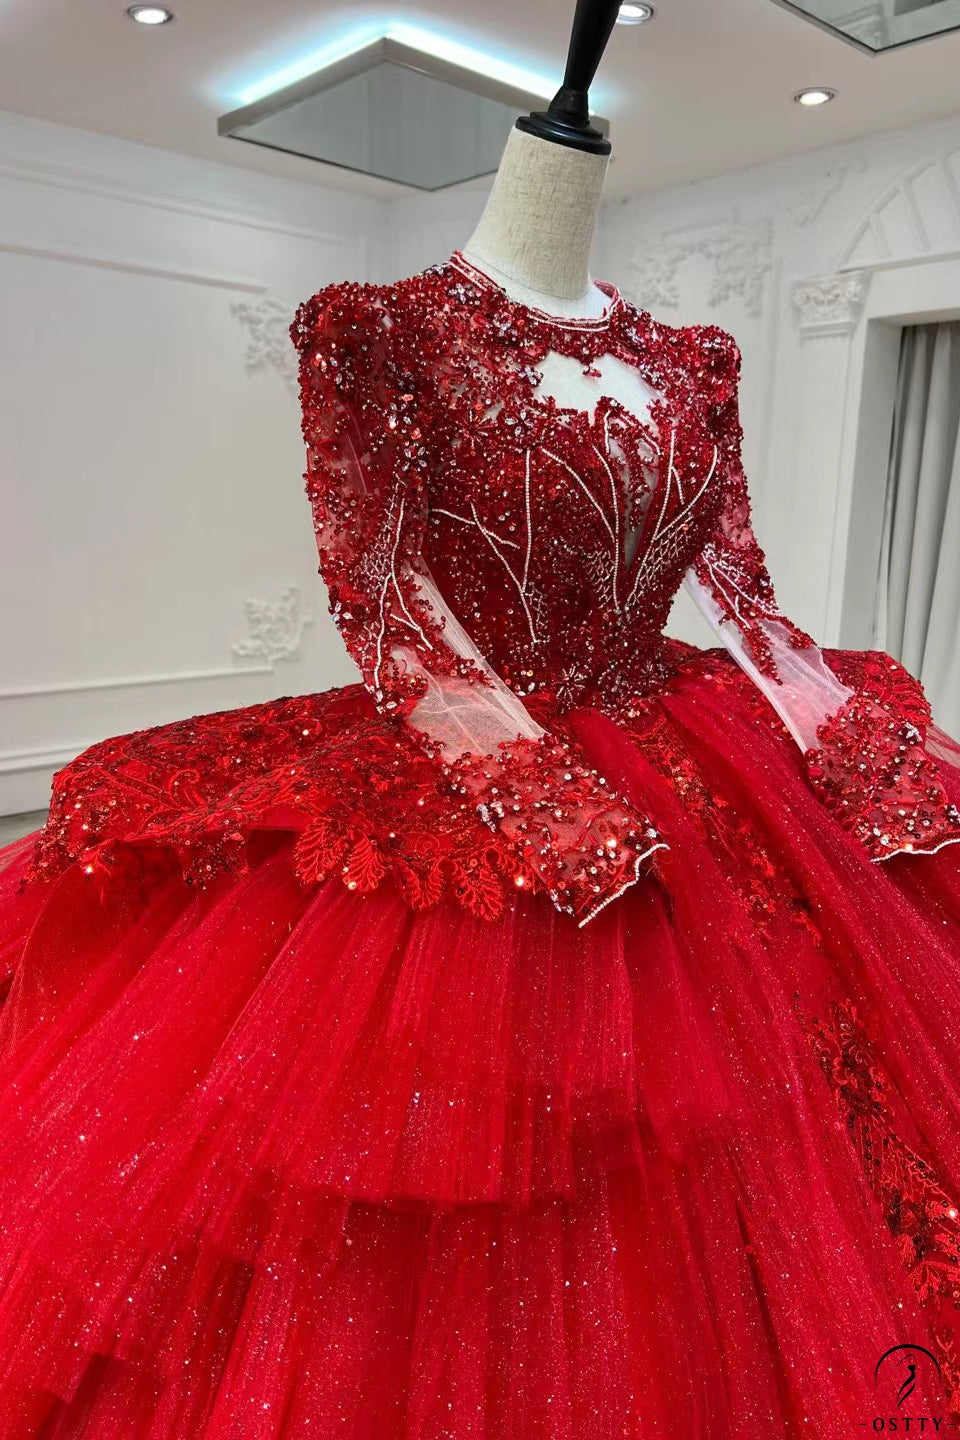 Dark Red Ball Gown Wedding Dresses 2019 Off The Shoulder Corset Lace Up  Back Floor Length Women Non White Colorful Bridal Gowns Custom From  Totallymodest, $96.52 | DHgate.Com